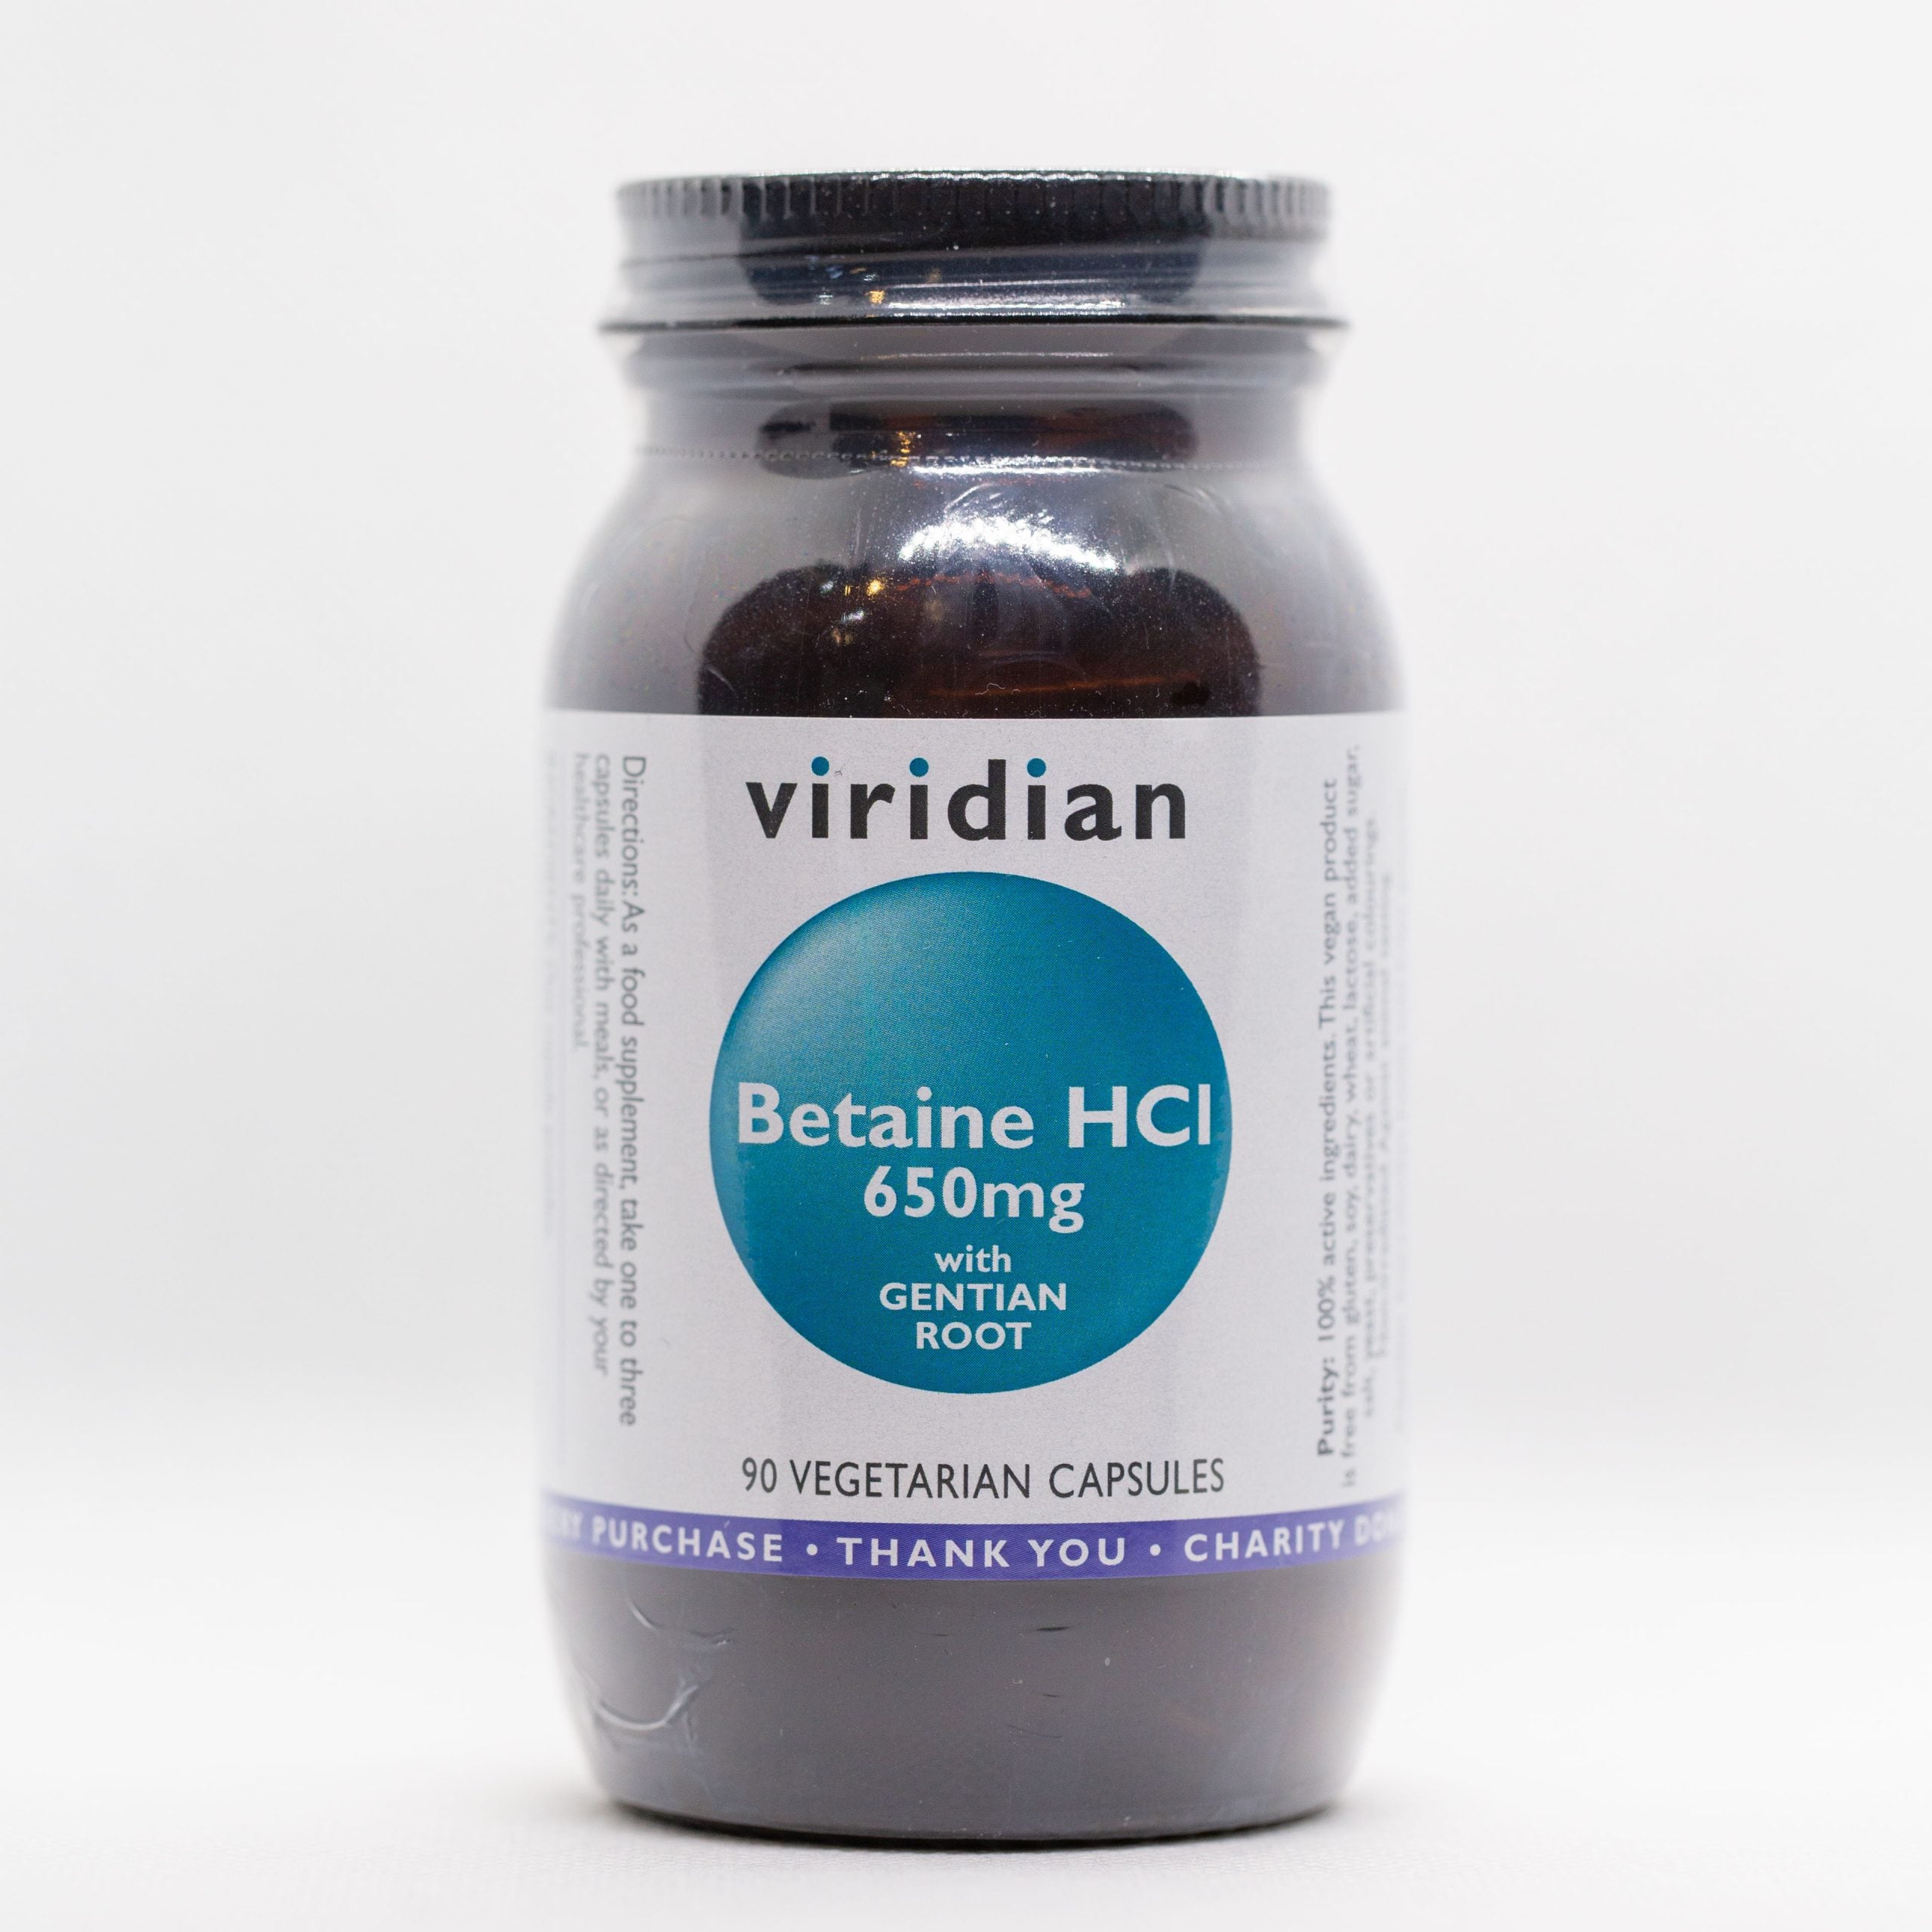 Viridian Betaine HCl 650mg with Gentian Veg Caps